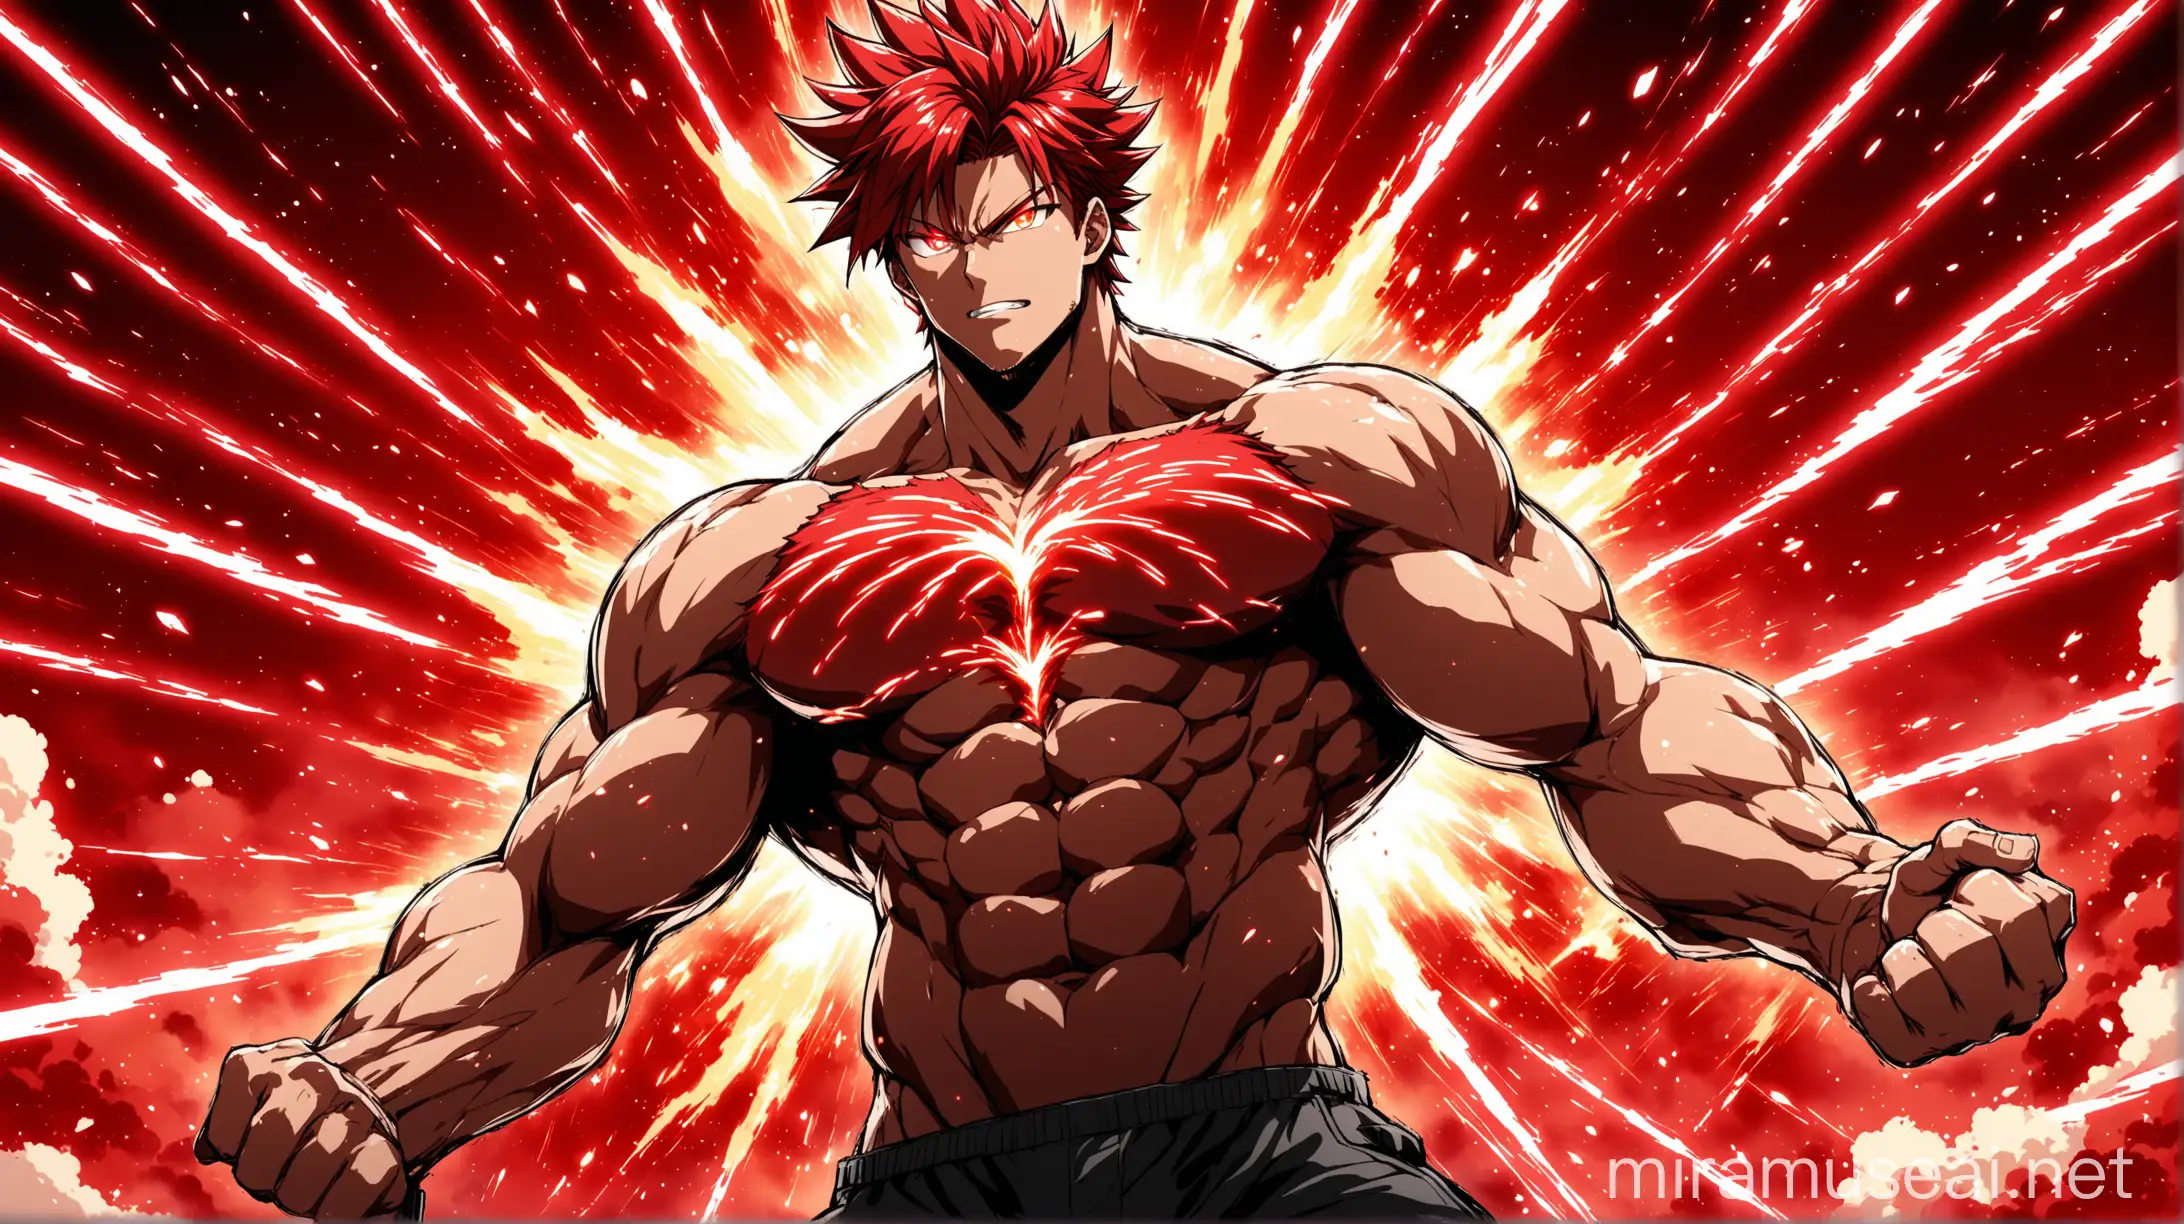 Anime alpha character with jacked body with a big v-taper shirtless with red glowing lines on his body, his eyes are white and his hair red, the theme of this image is red-white, massive red-white explosions in the background